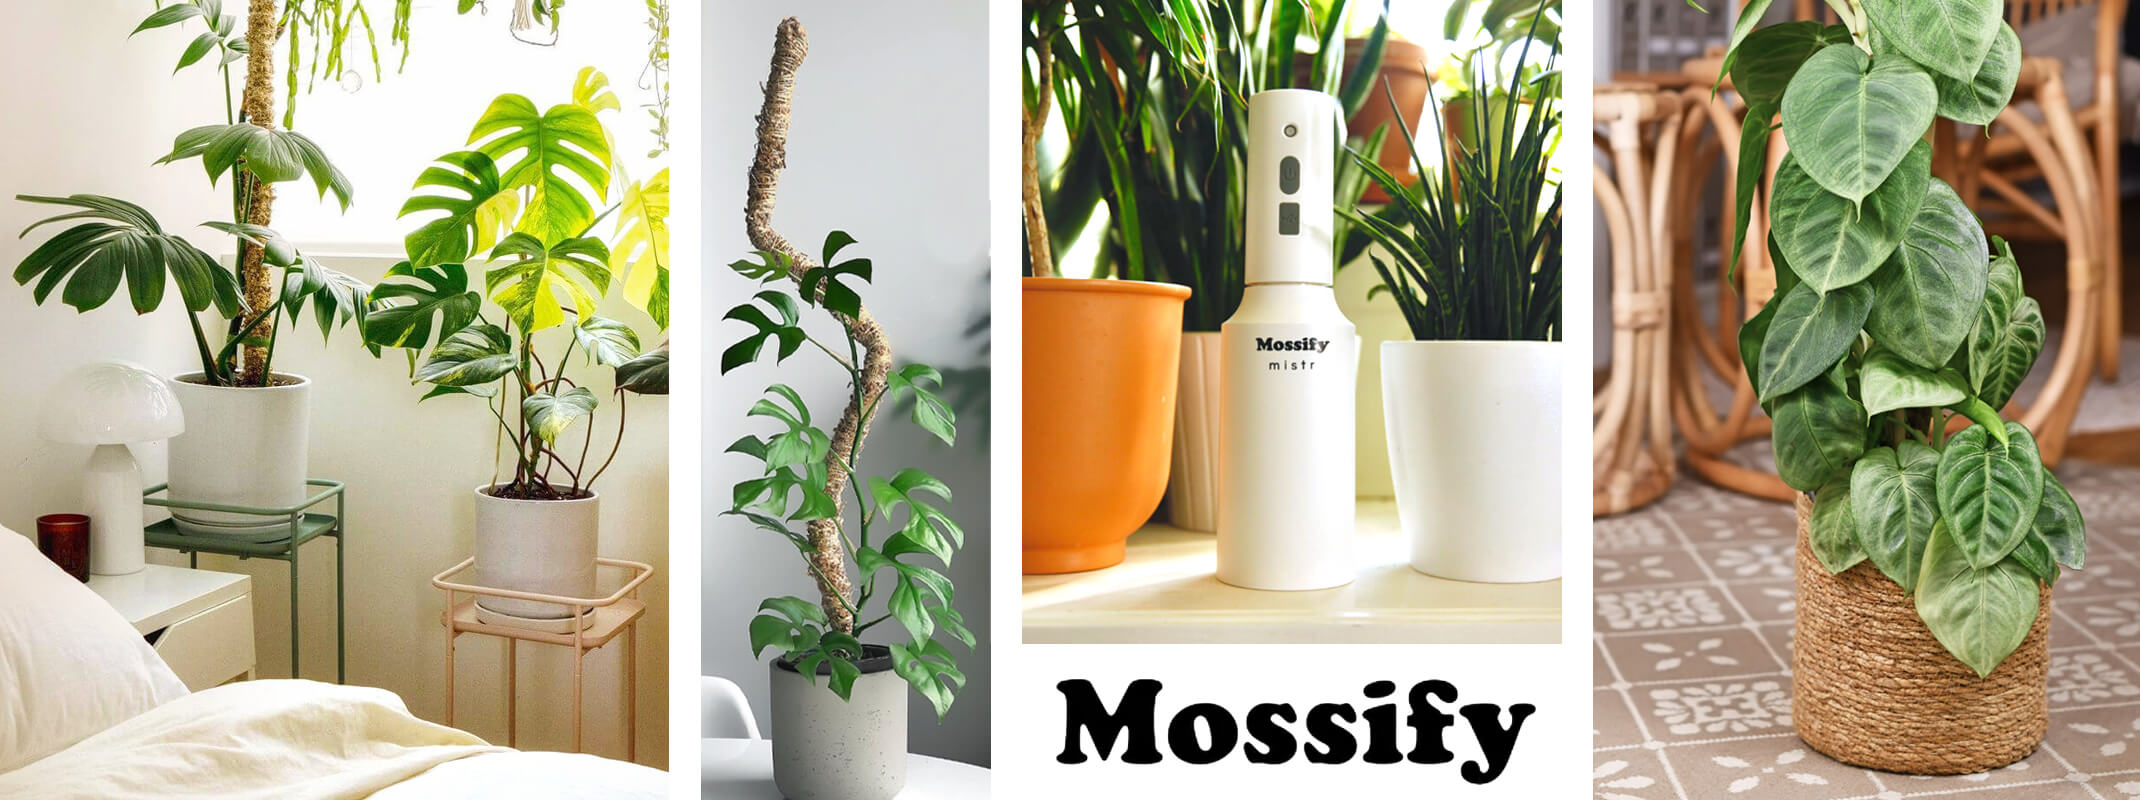 mossify bendable moss poles and mistr for houseplants